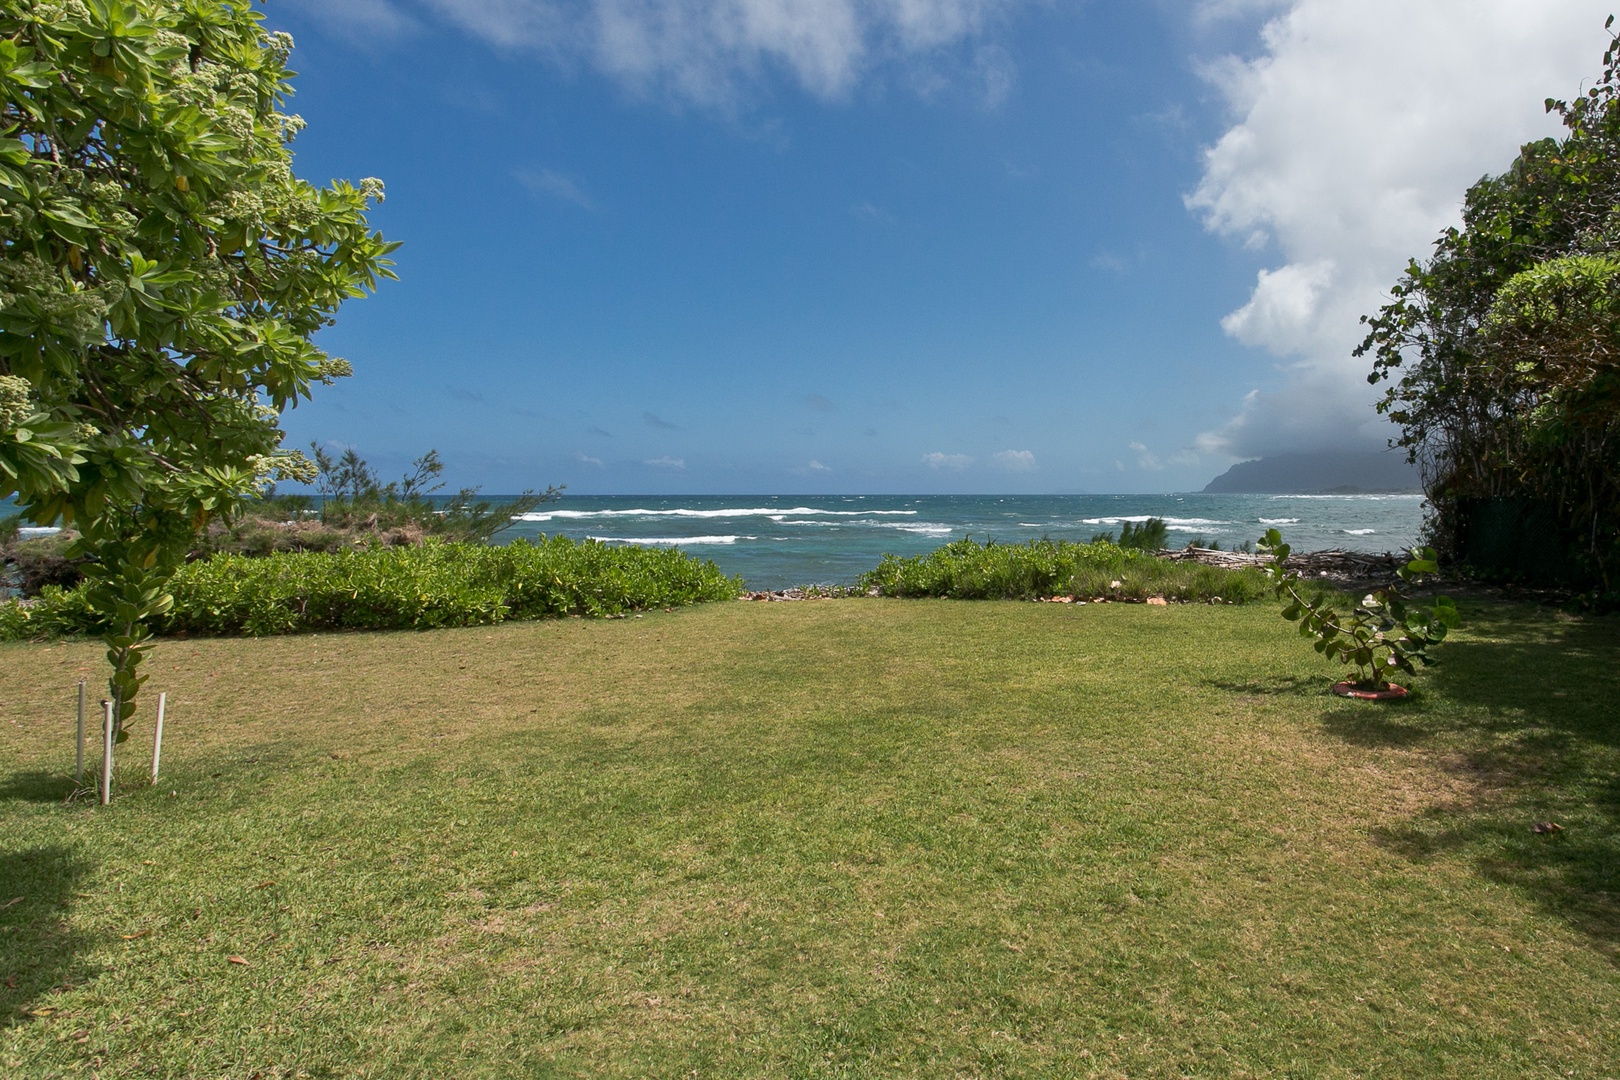 Laie Vacation Rentals, Waipuna Hale - Grand back yard with private beach access (seasonal, due to high tides).